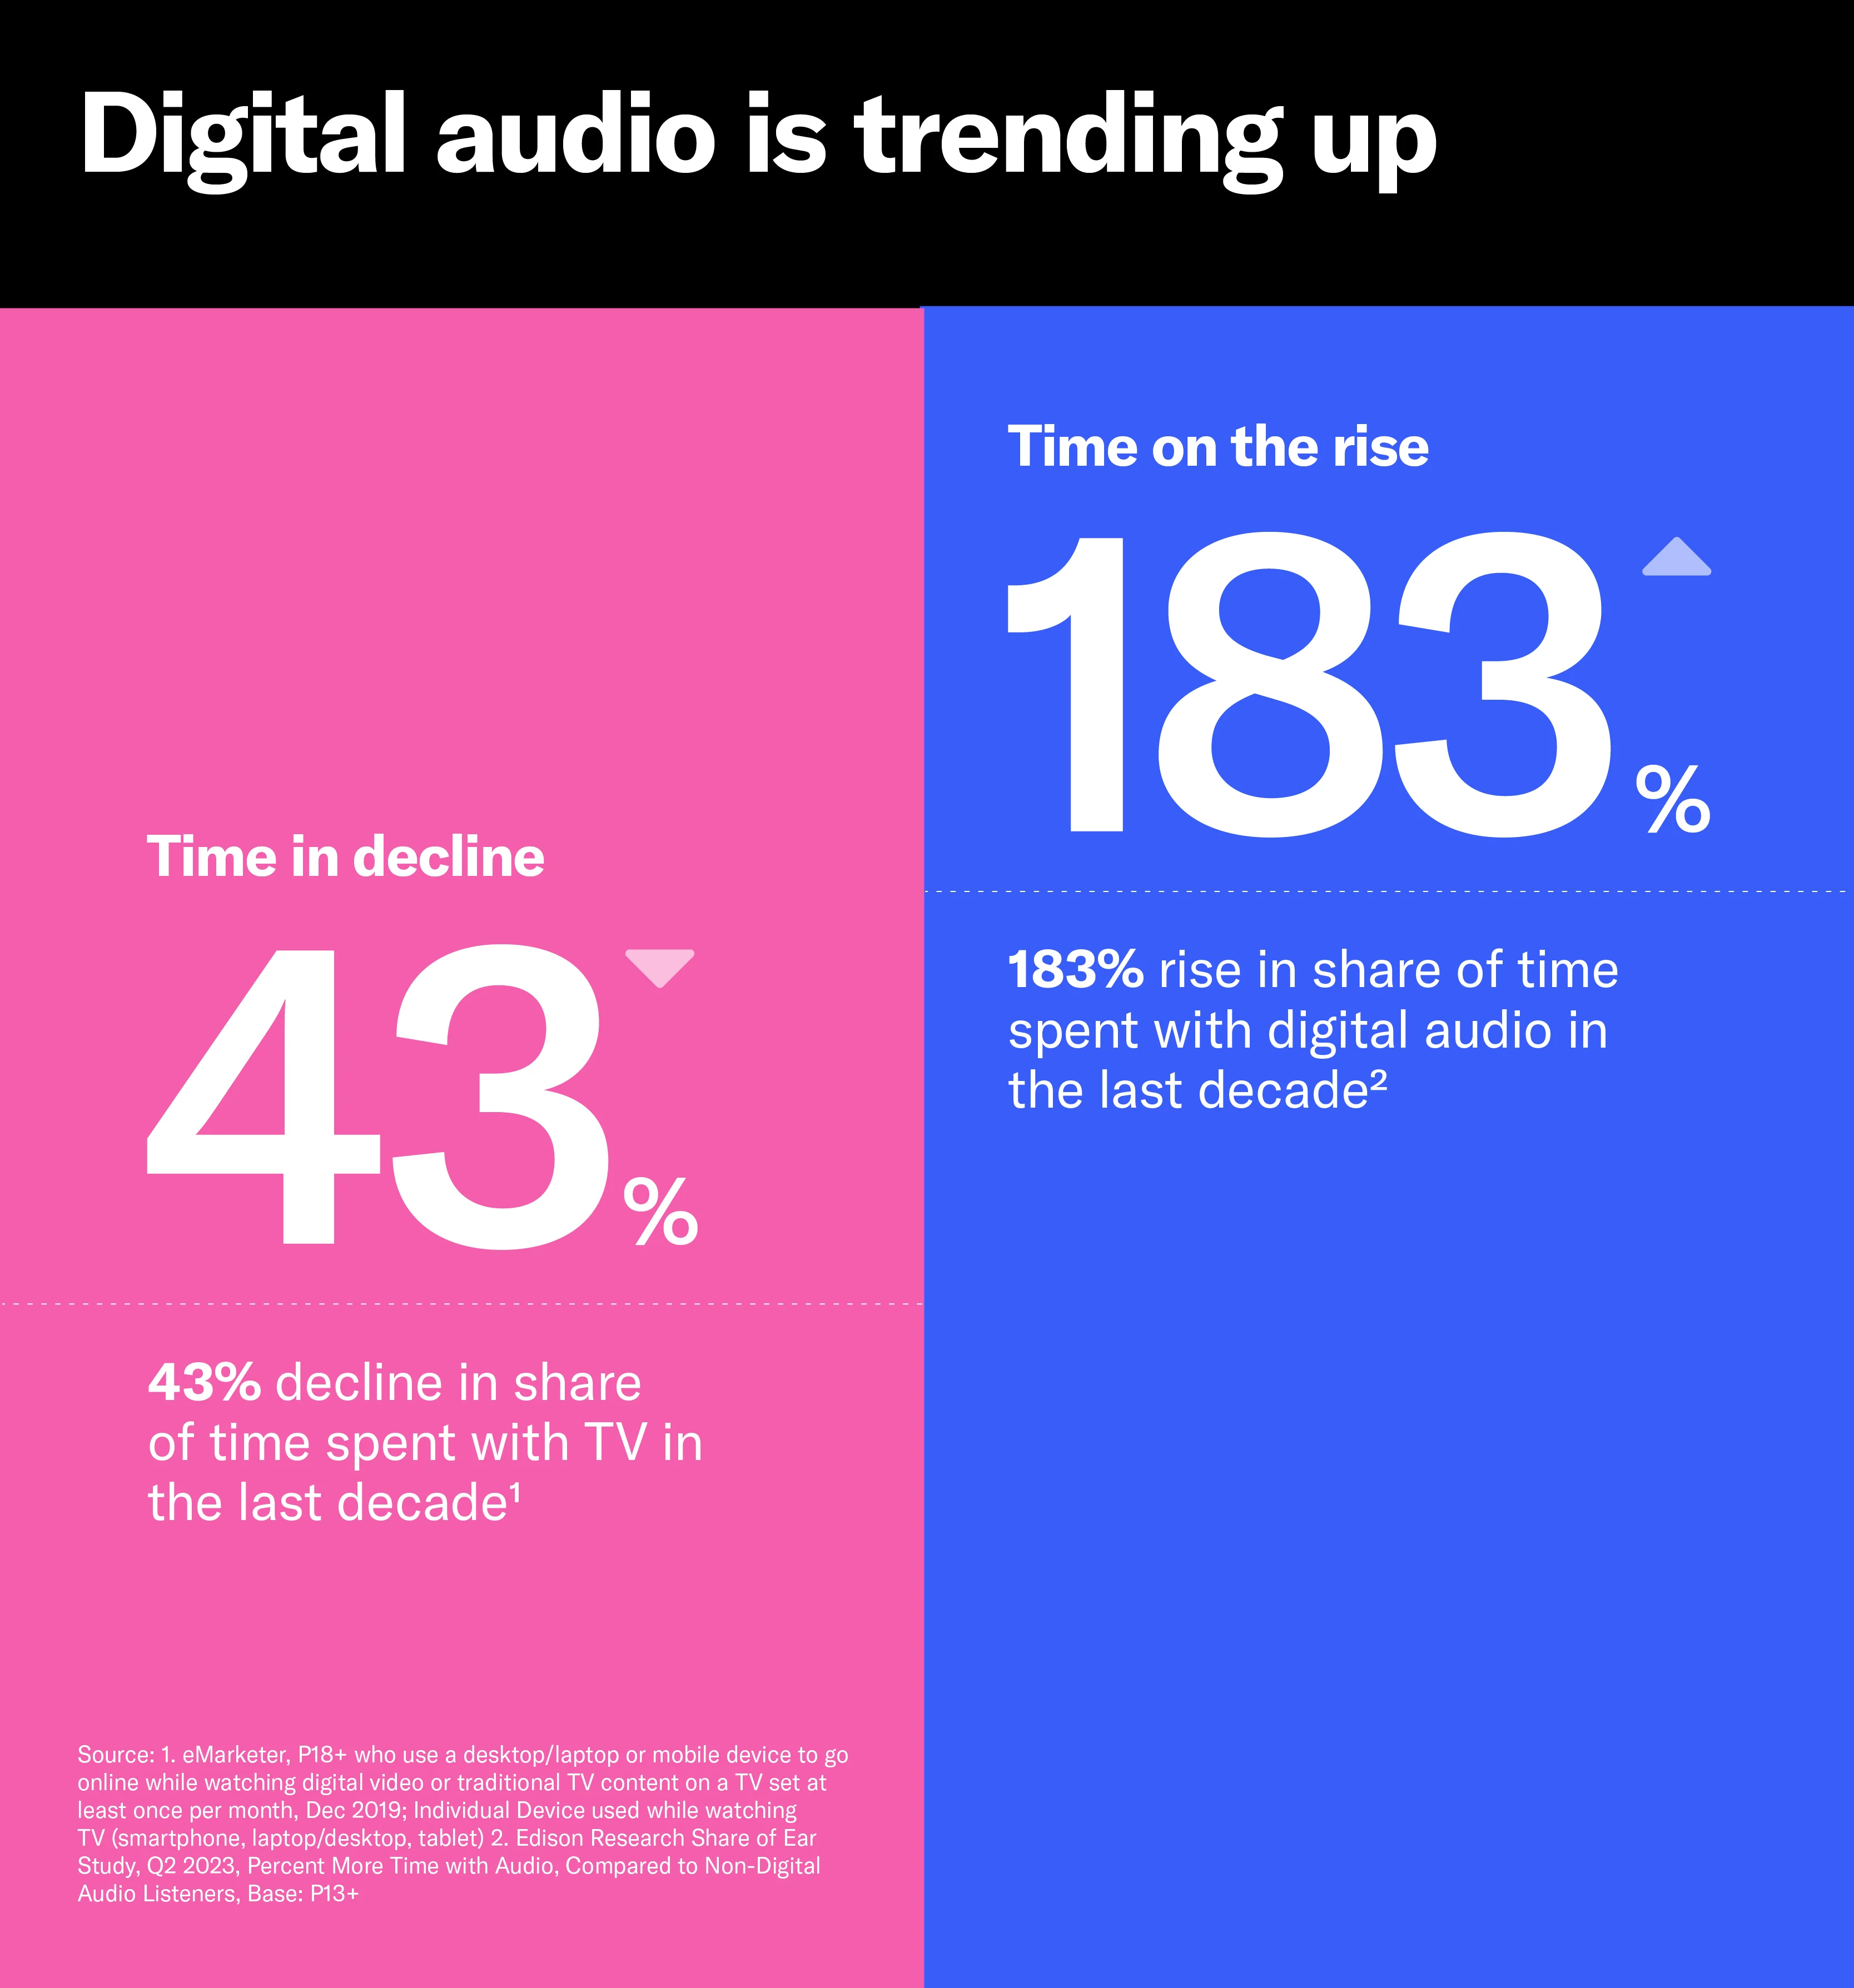 Audiences are spending more time with digital audio